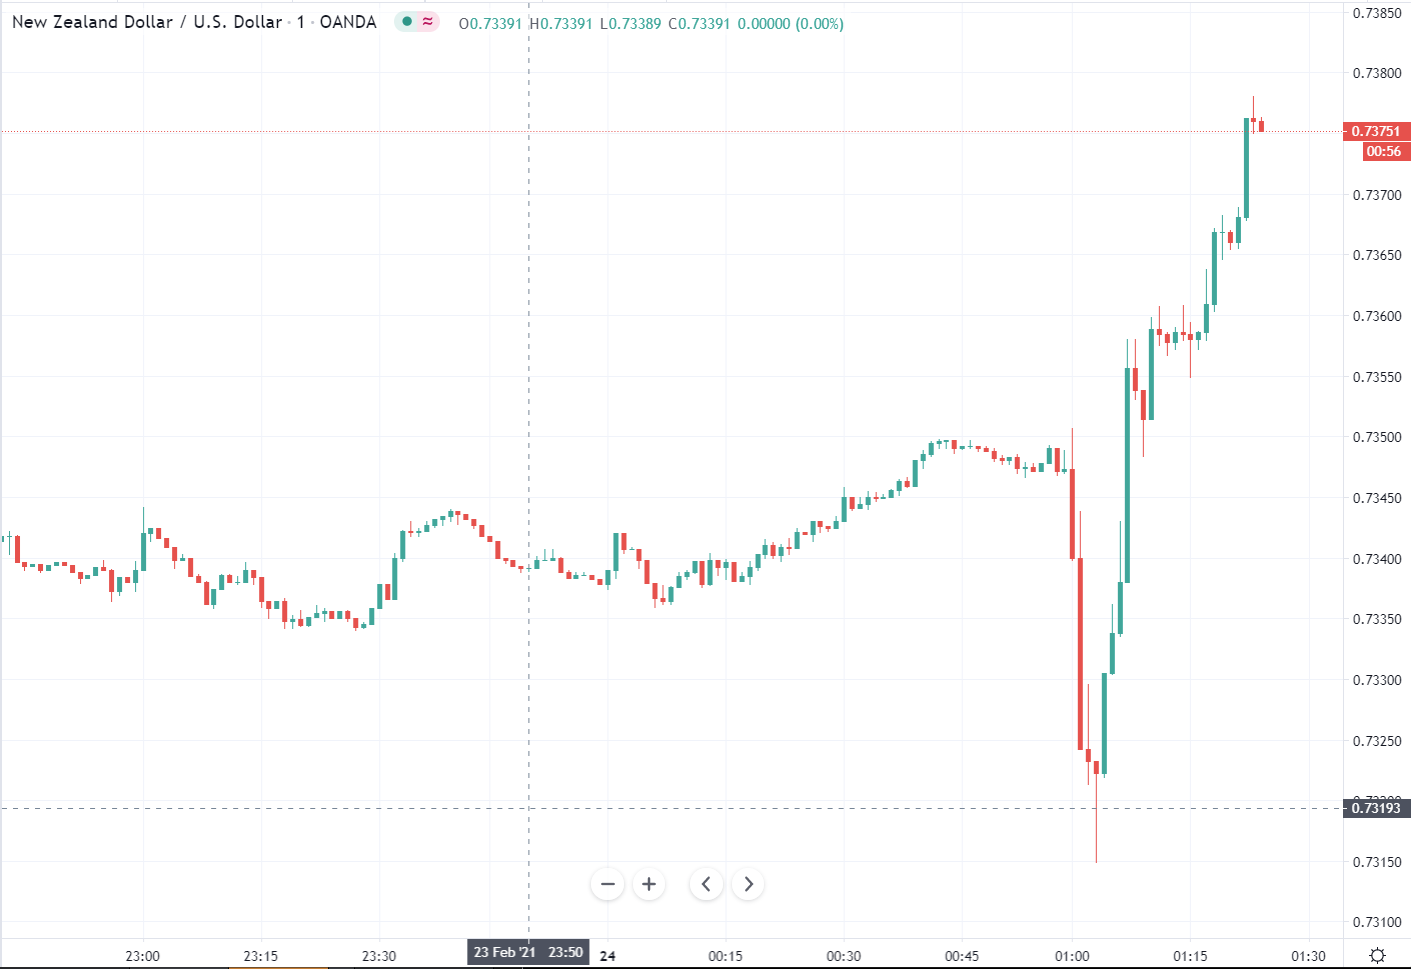 The NZD is bid, easily regaining its losses immediately after the RBNZ statement.